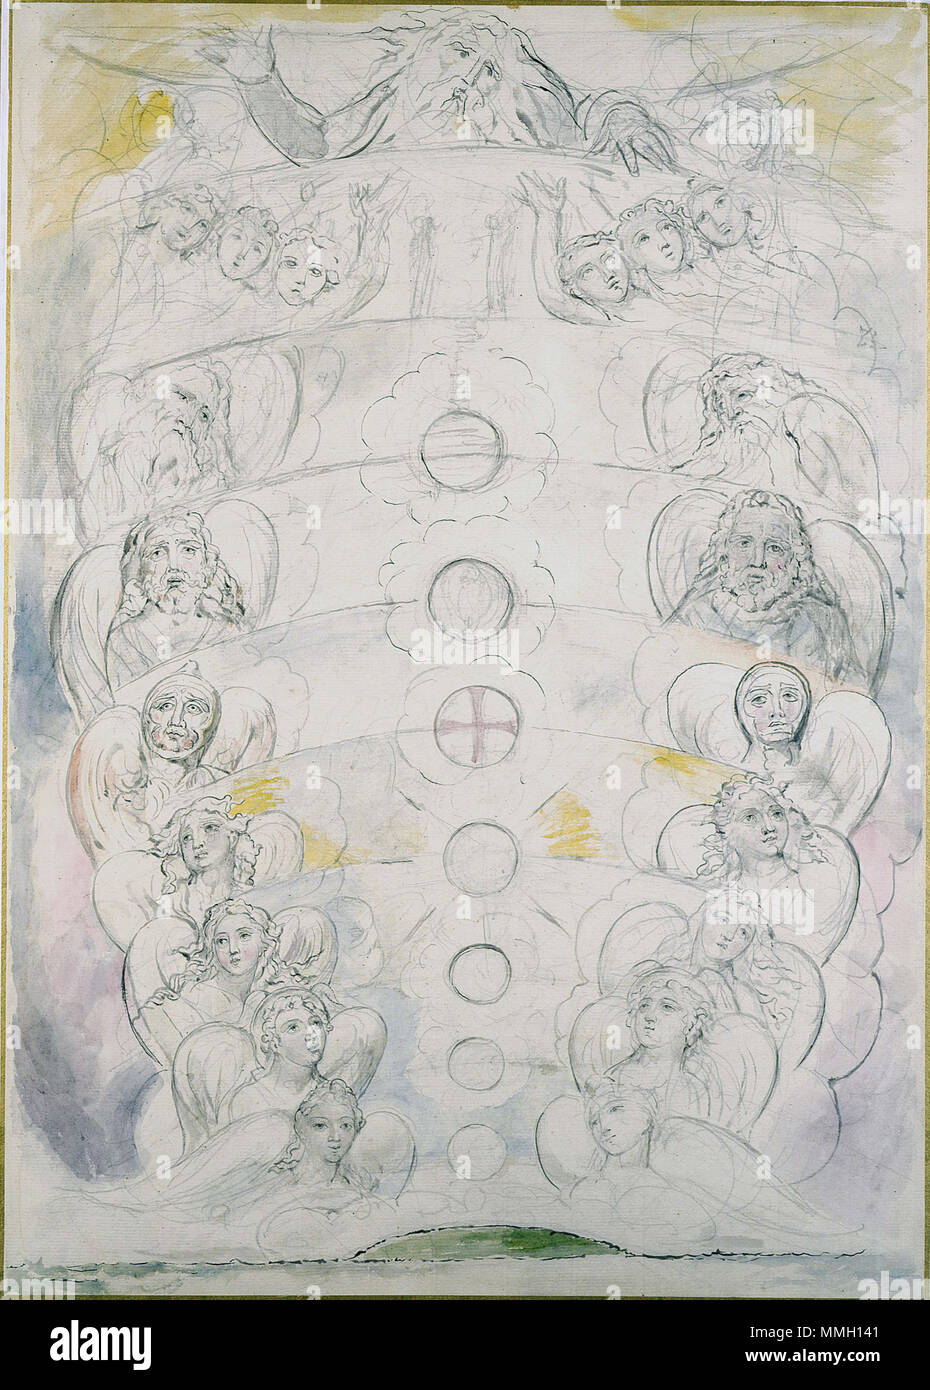 . English: Illustrations to Dante's Divine Comedy object 100 Butlin 812-97 The Vision of the Deity from Whom Proceed the Nine Spheres  . 1 September 2004, 18:20:05.   William Blake  (1757–1827)       Alternative names W. Blake; Uil'iam Bleik  Description British painter, poet, writer, theologian, collector and engraver  Date of birth/death 28 November 1757 12 August 1827  Location of birth/death Broadwick Street Charing Cross  Work location London  Authority control  : Q41513 VIAF:?54144439 ISNI:?0000 0001 2096 135X ULAN:?500012489 LCCN:?n78095331 NLA:?35019221 WorldCat Illustrations to Dante' Stock Photo